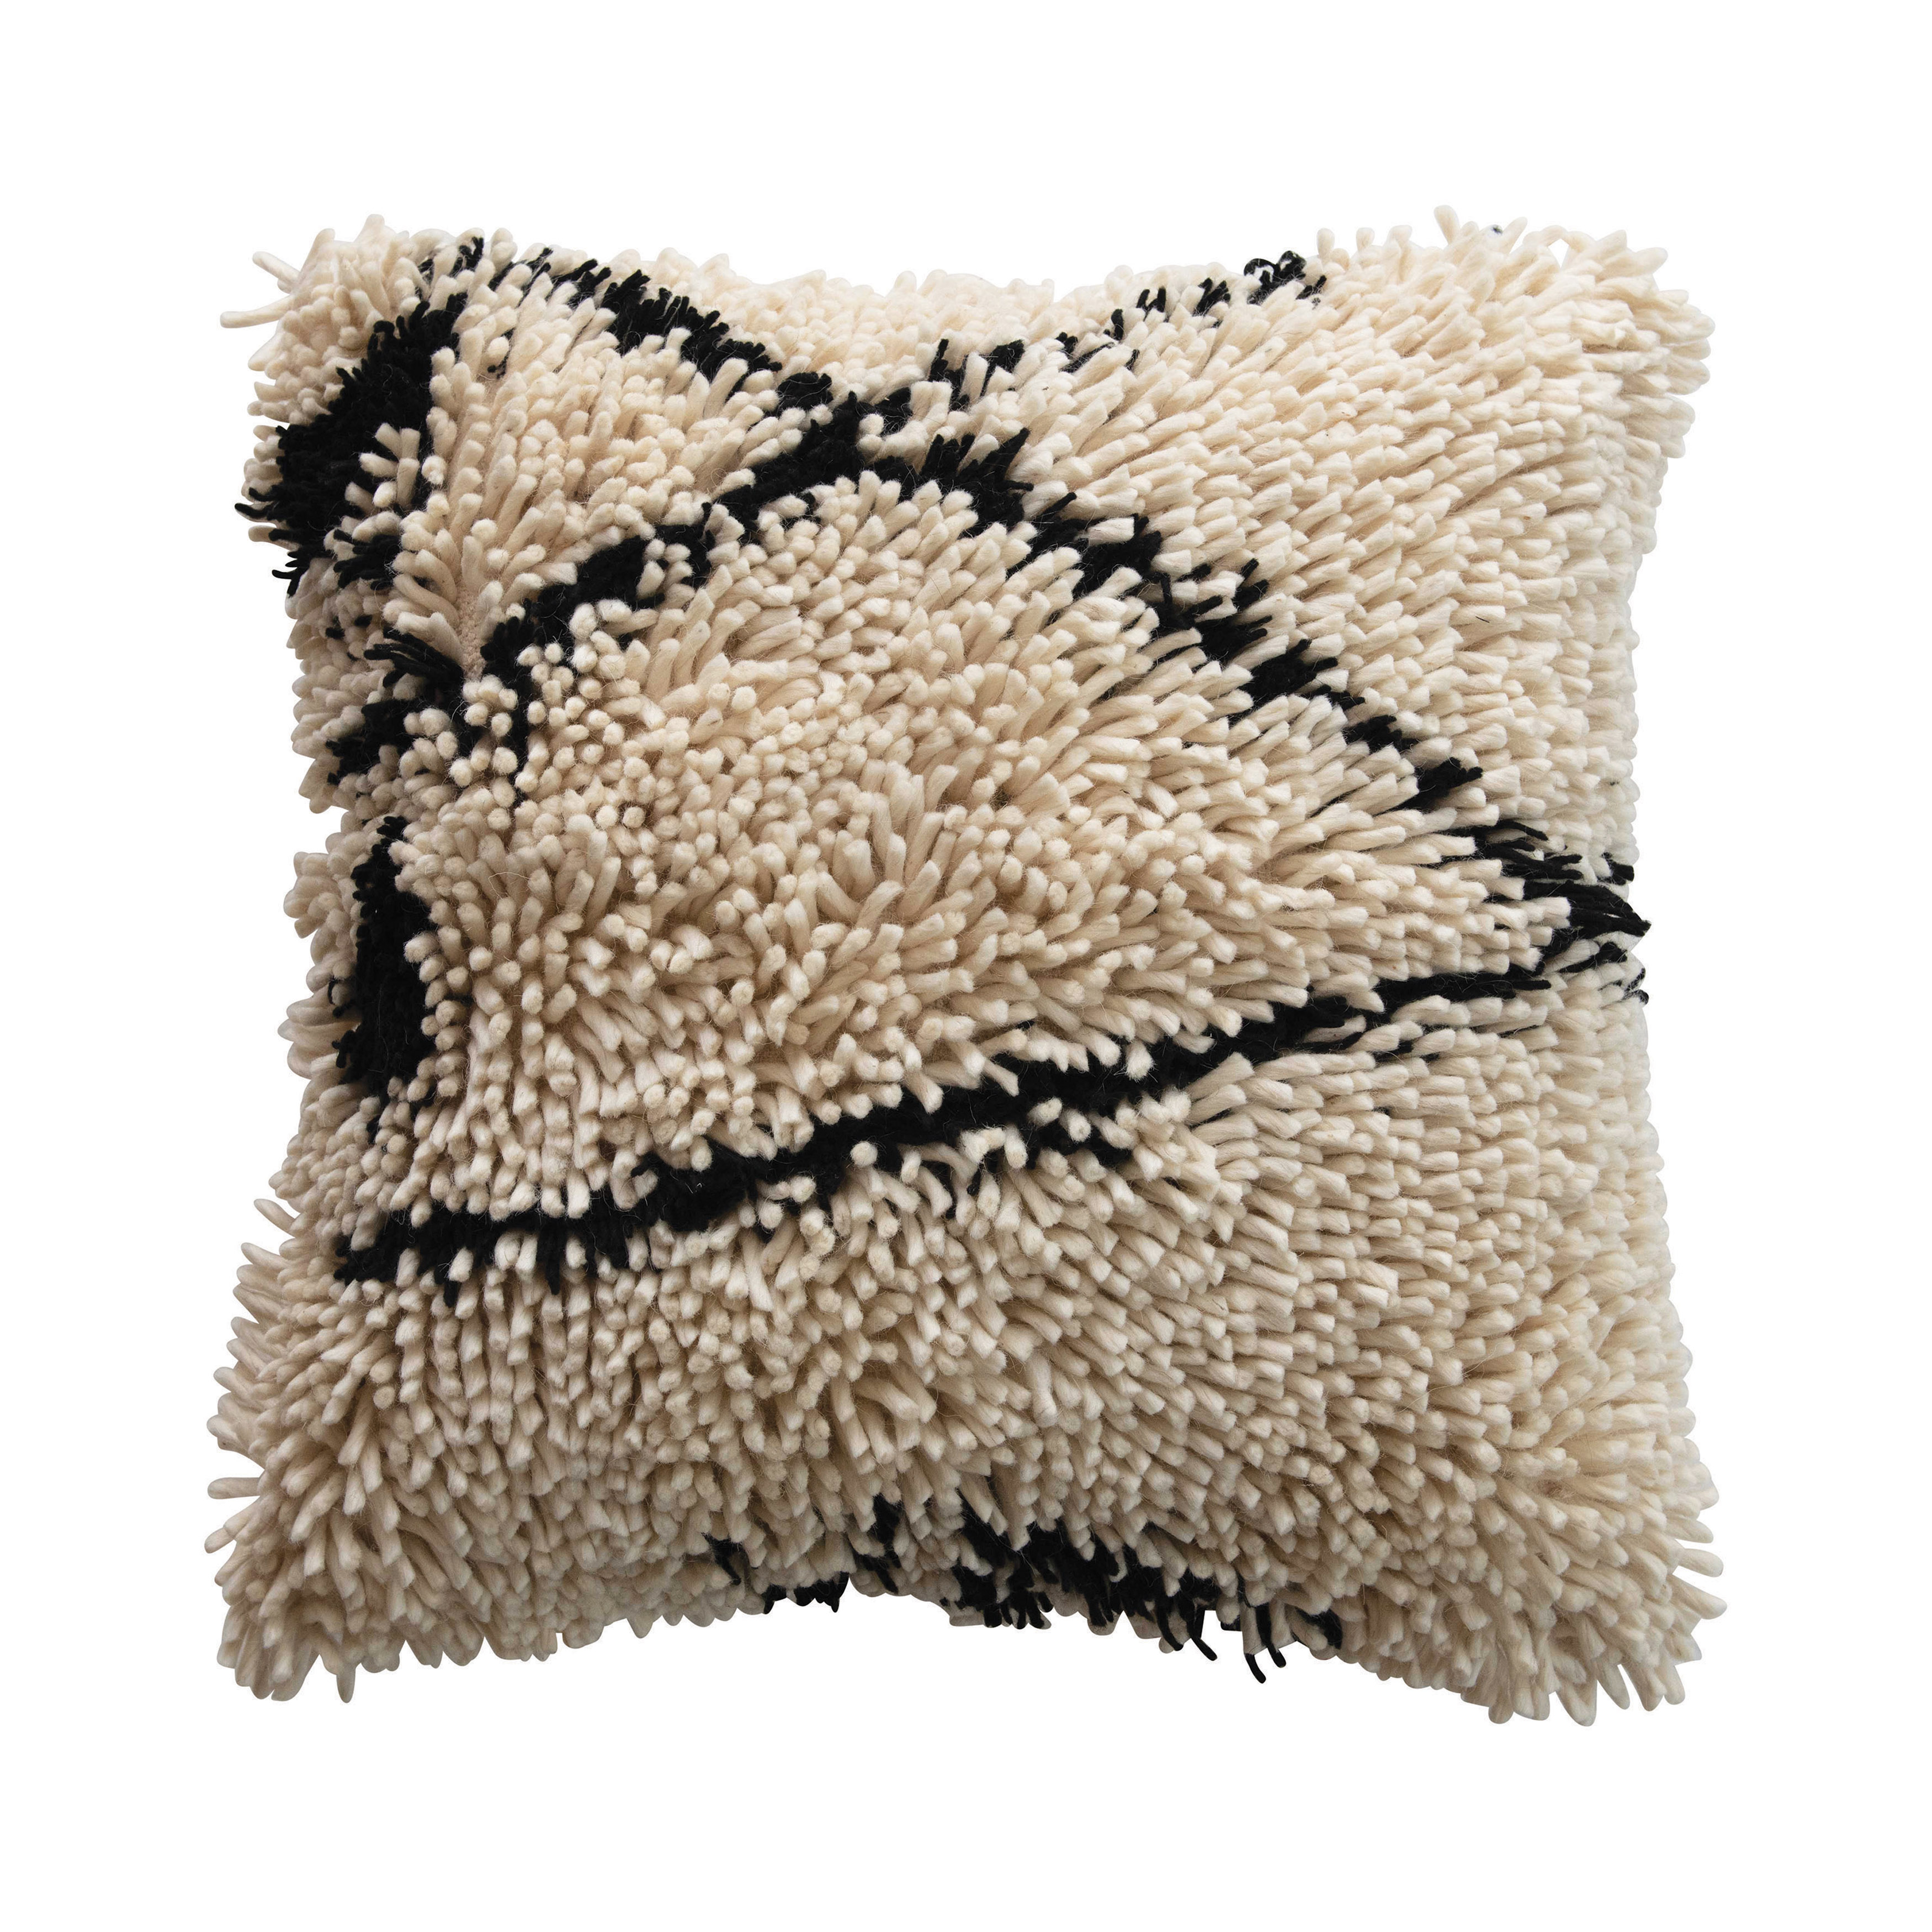 Woven Wool Shag Pillow, Black & Cream Color - Nomad Home